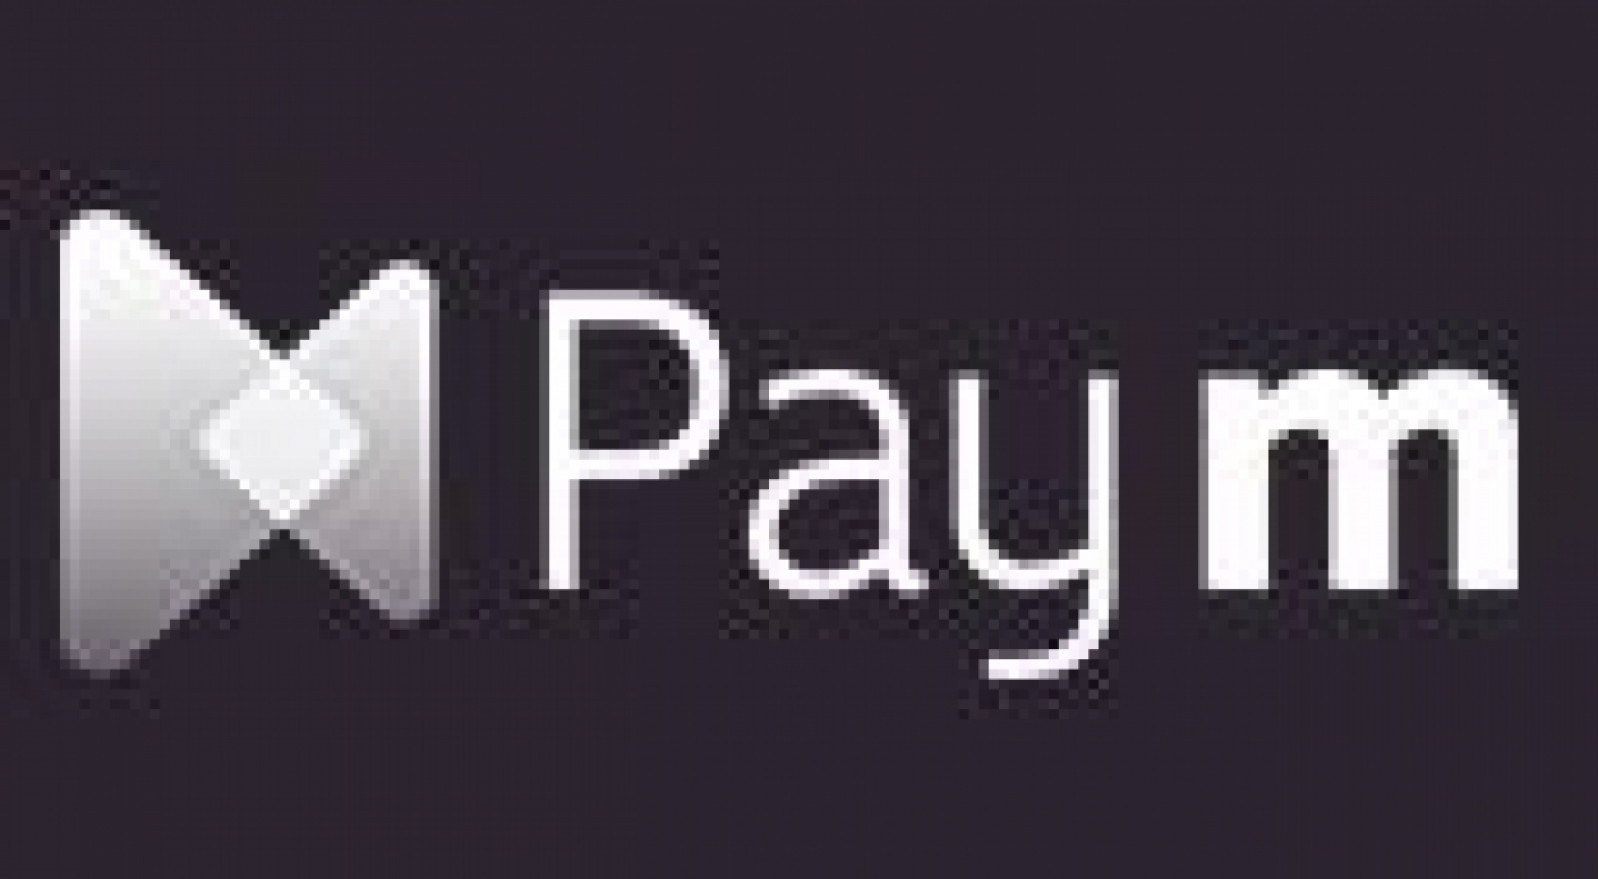 Paym launches today - How will it impact your busi...